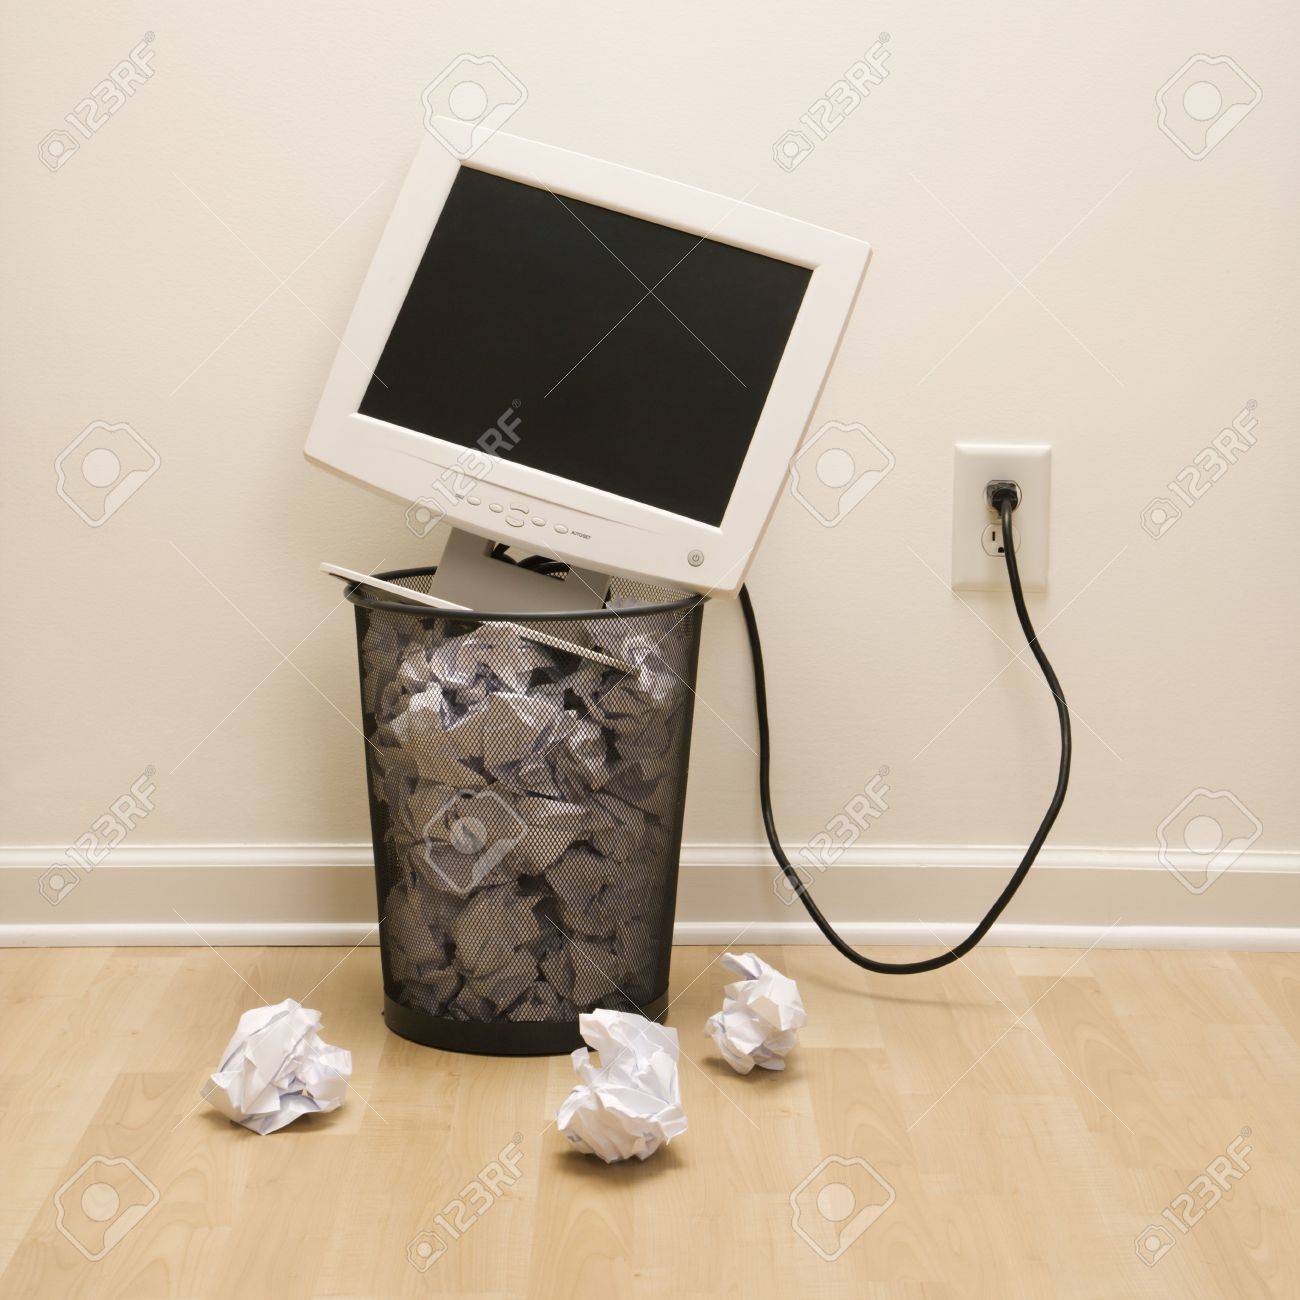 2190420-computer-monitor-in-trash-can-surrounded-by-crumpled-up-paper-.jpg